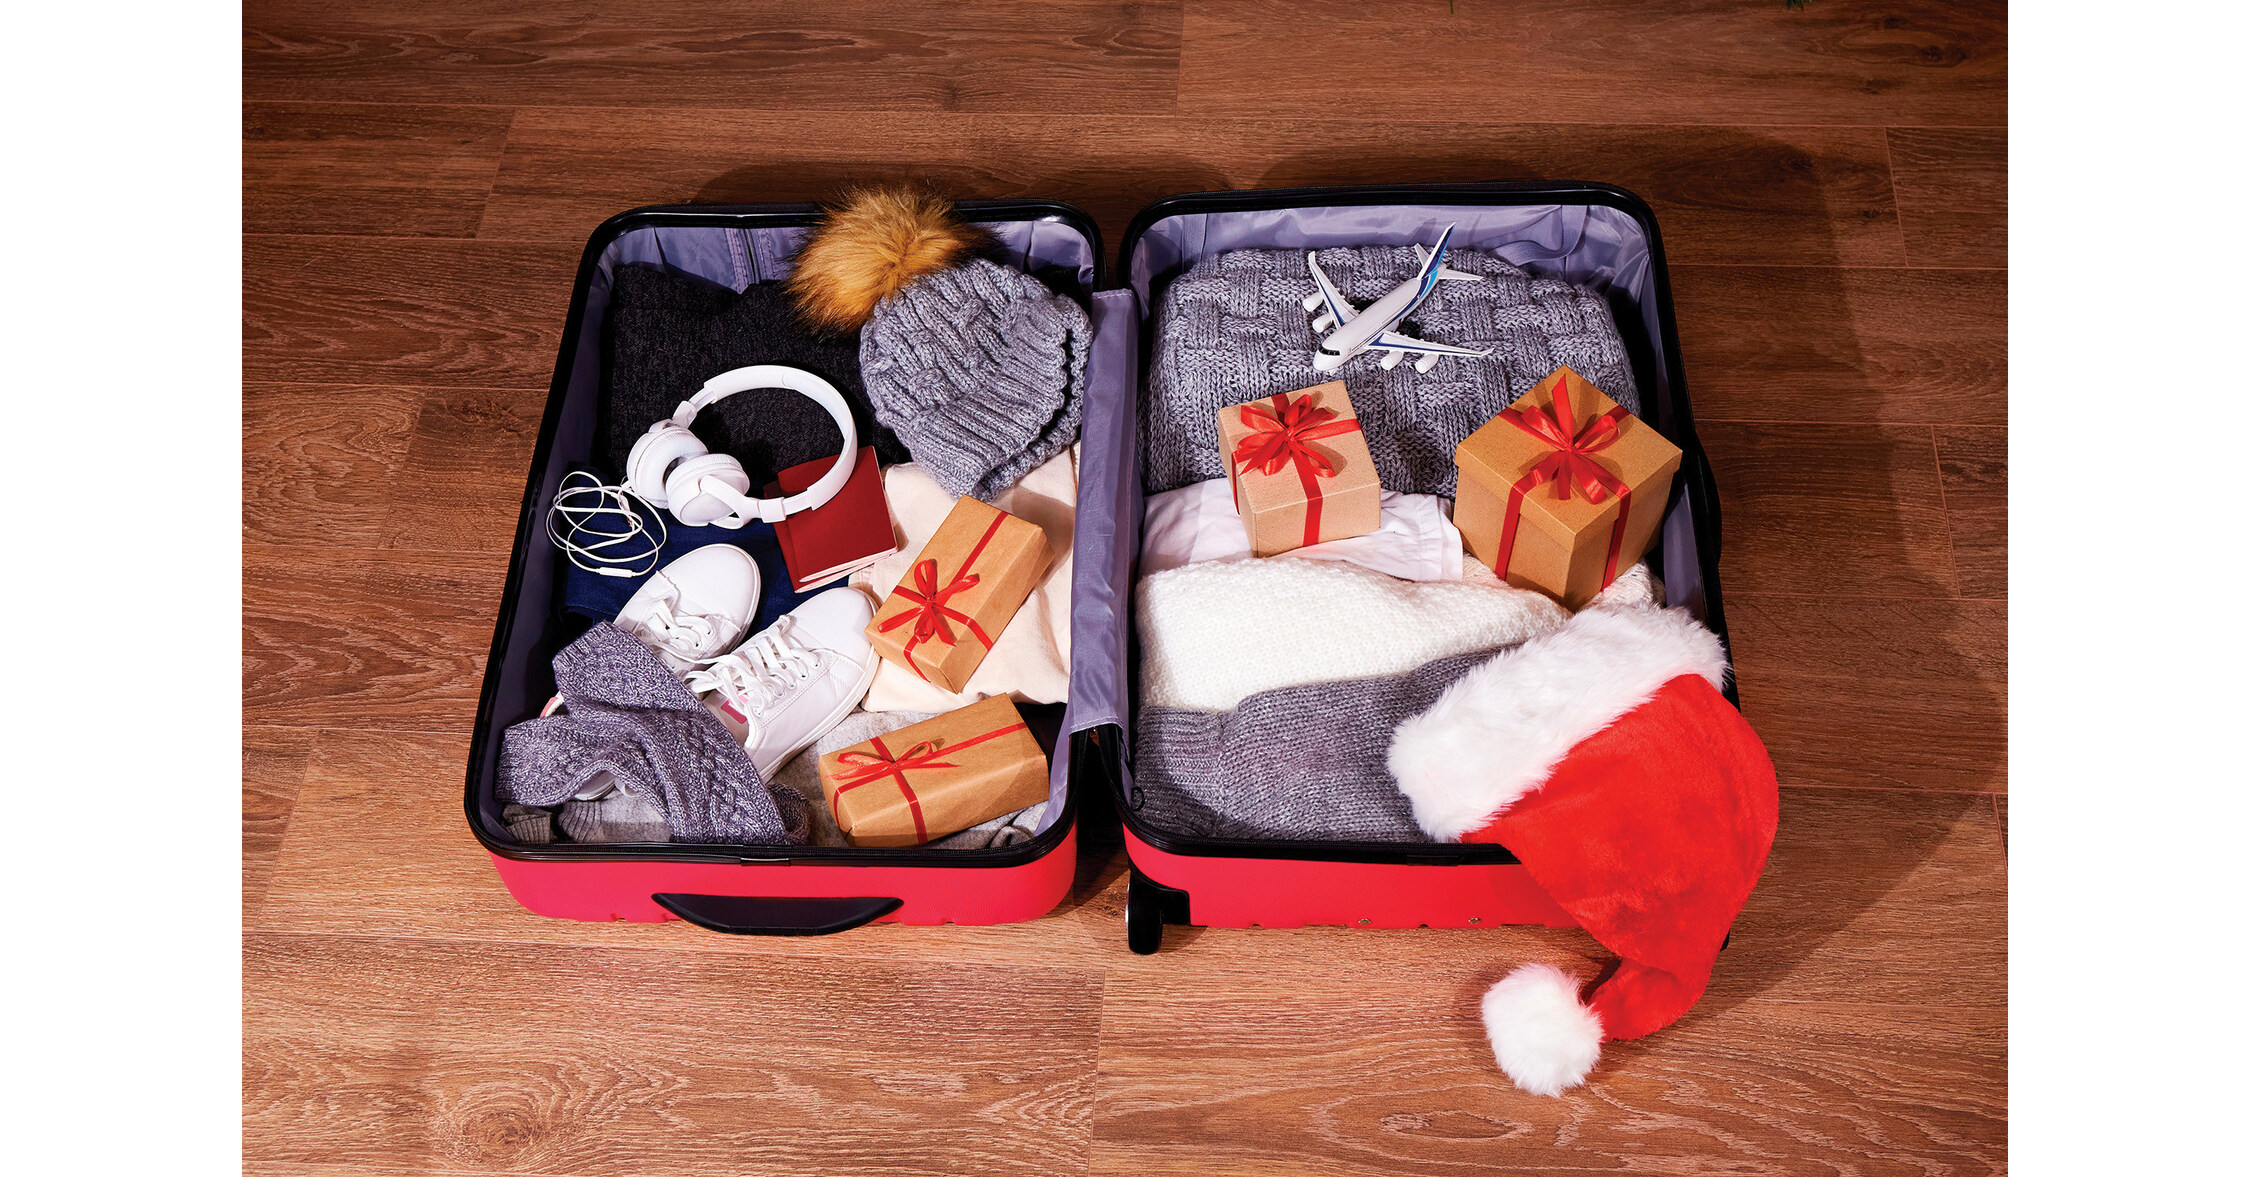 Top 5 Holiday Travel Safety Tips for Families